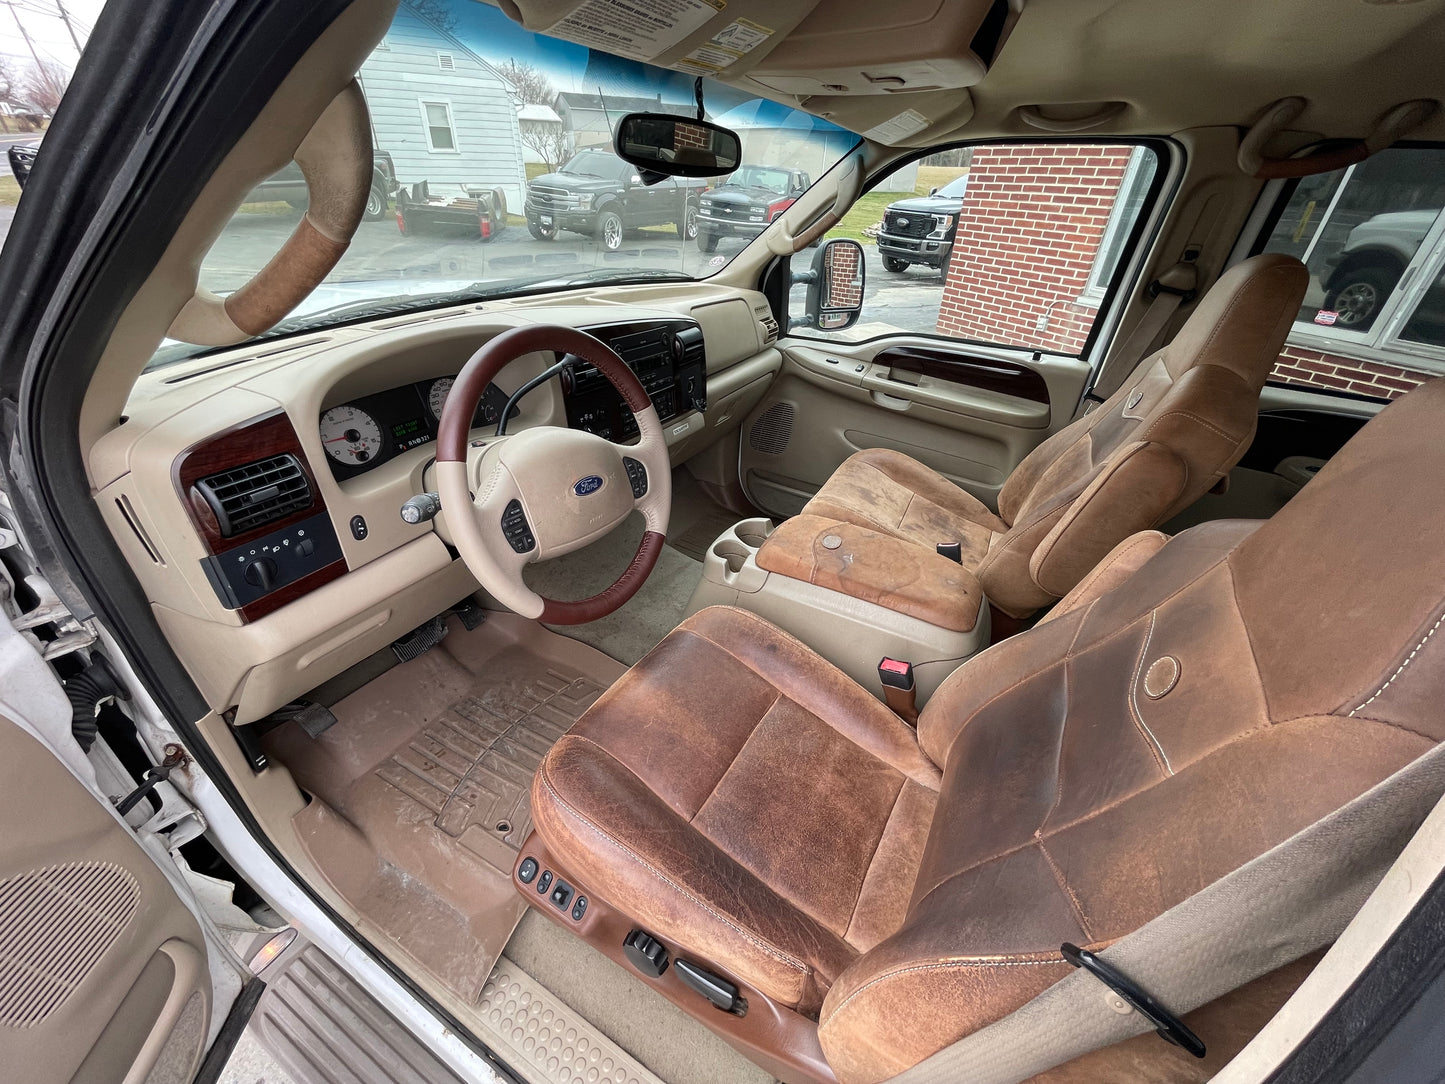 2005 F250 King Ranch 177k miles- Clean Title